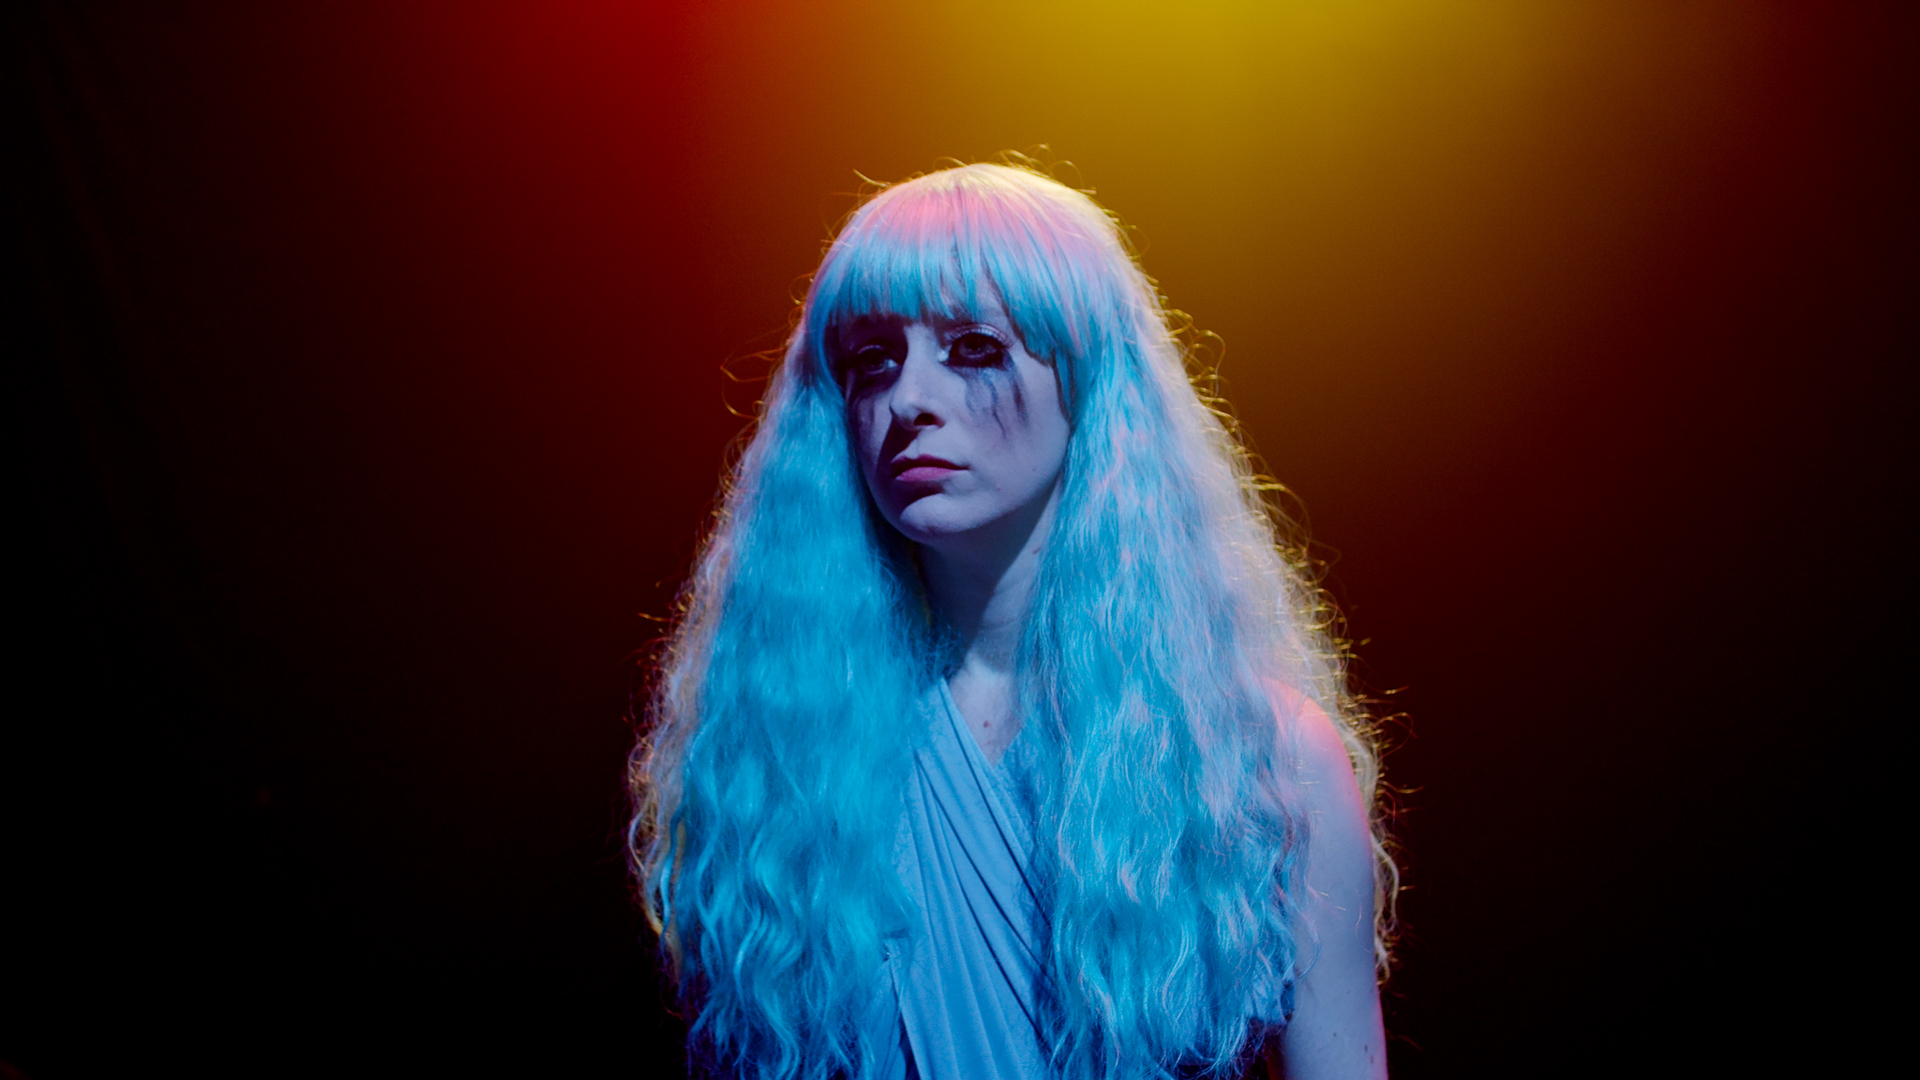 Woman with long hair looks sad in blue, yellow, and orange light and clown makeup.